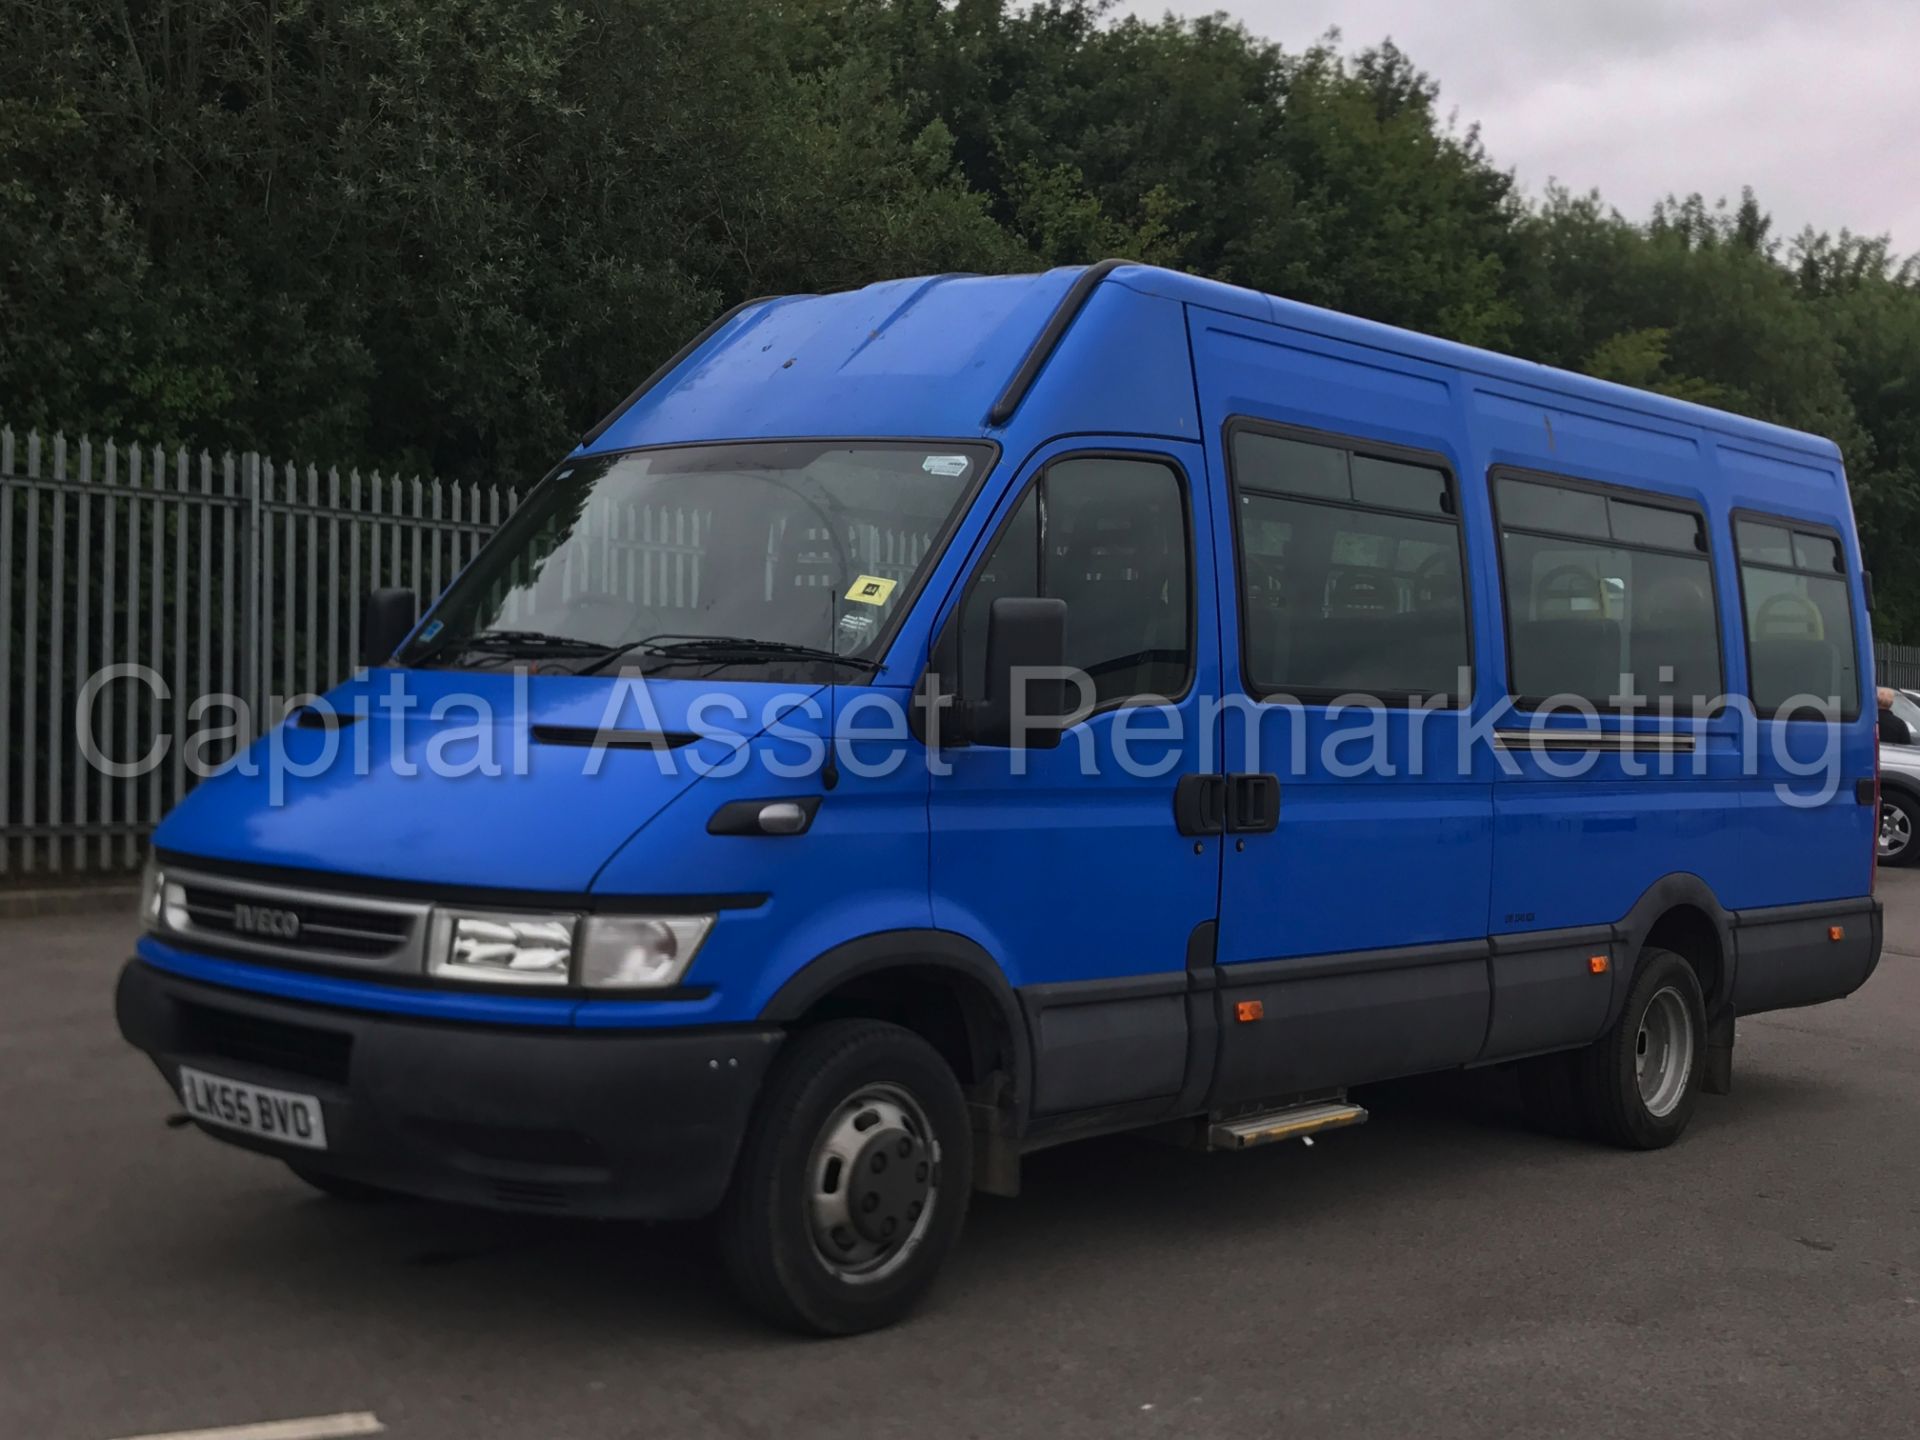 IVECO DAILY 40C14 '17 SEATER COACH / BUS' (2006 MODEL) '3.0 DIESEL - 6 SPEED' *IRIS BUS* (1 OWNER) - Image 5 of 23